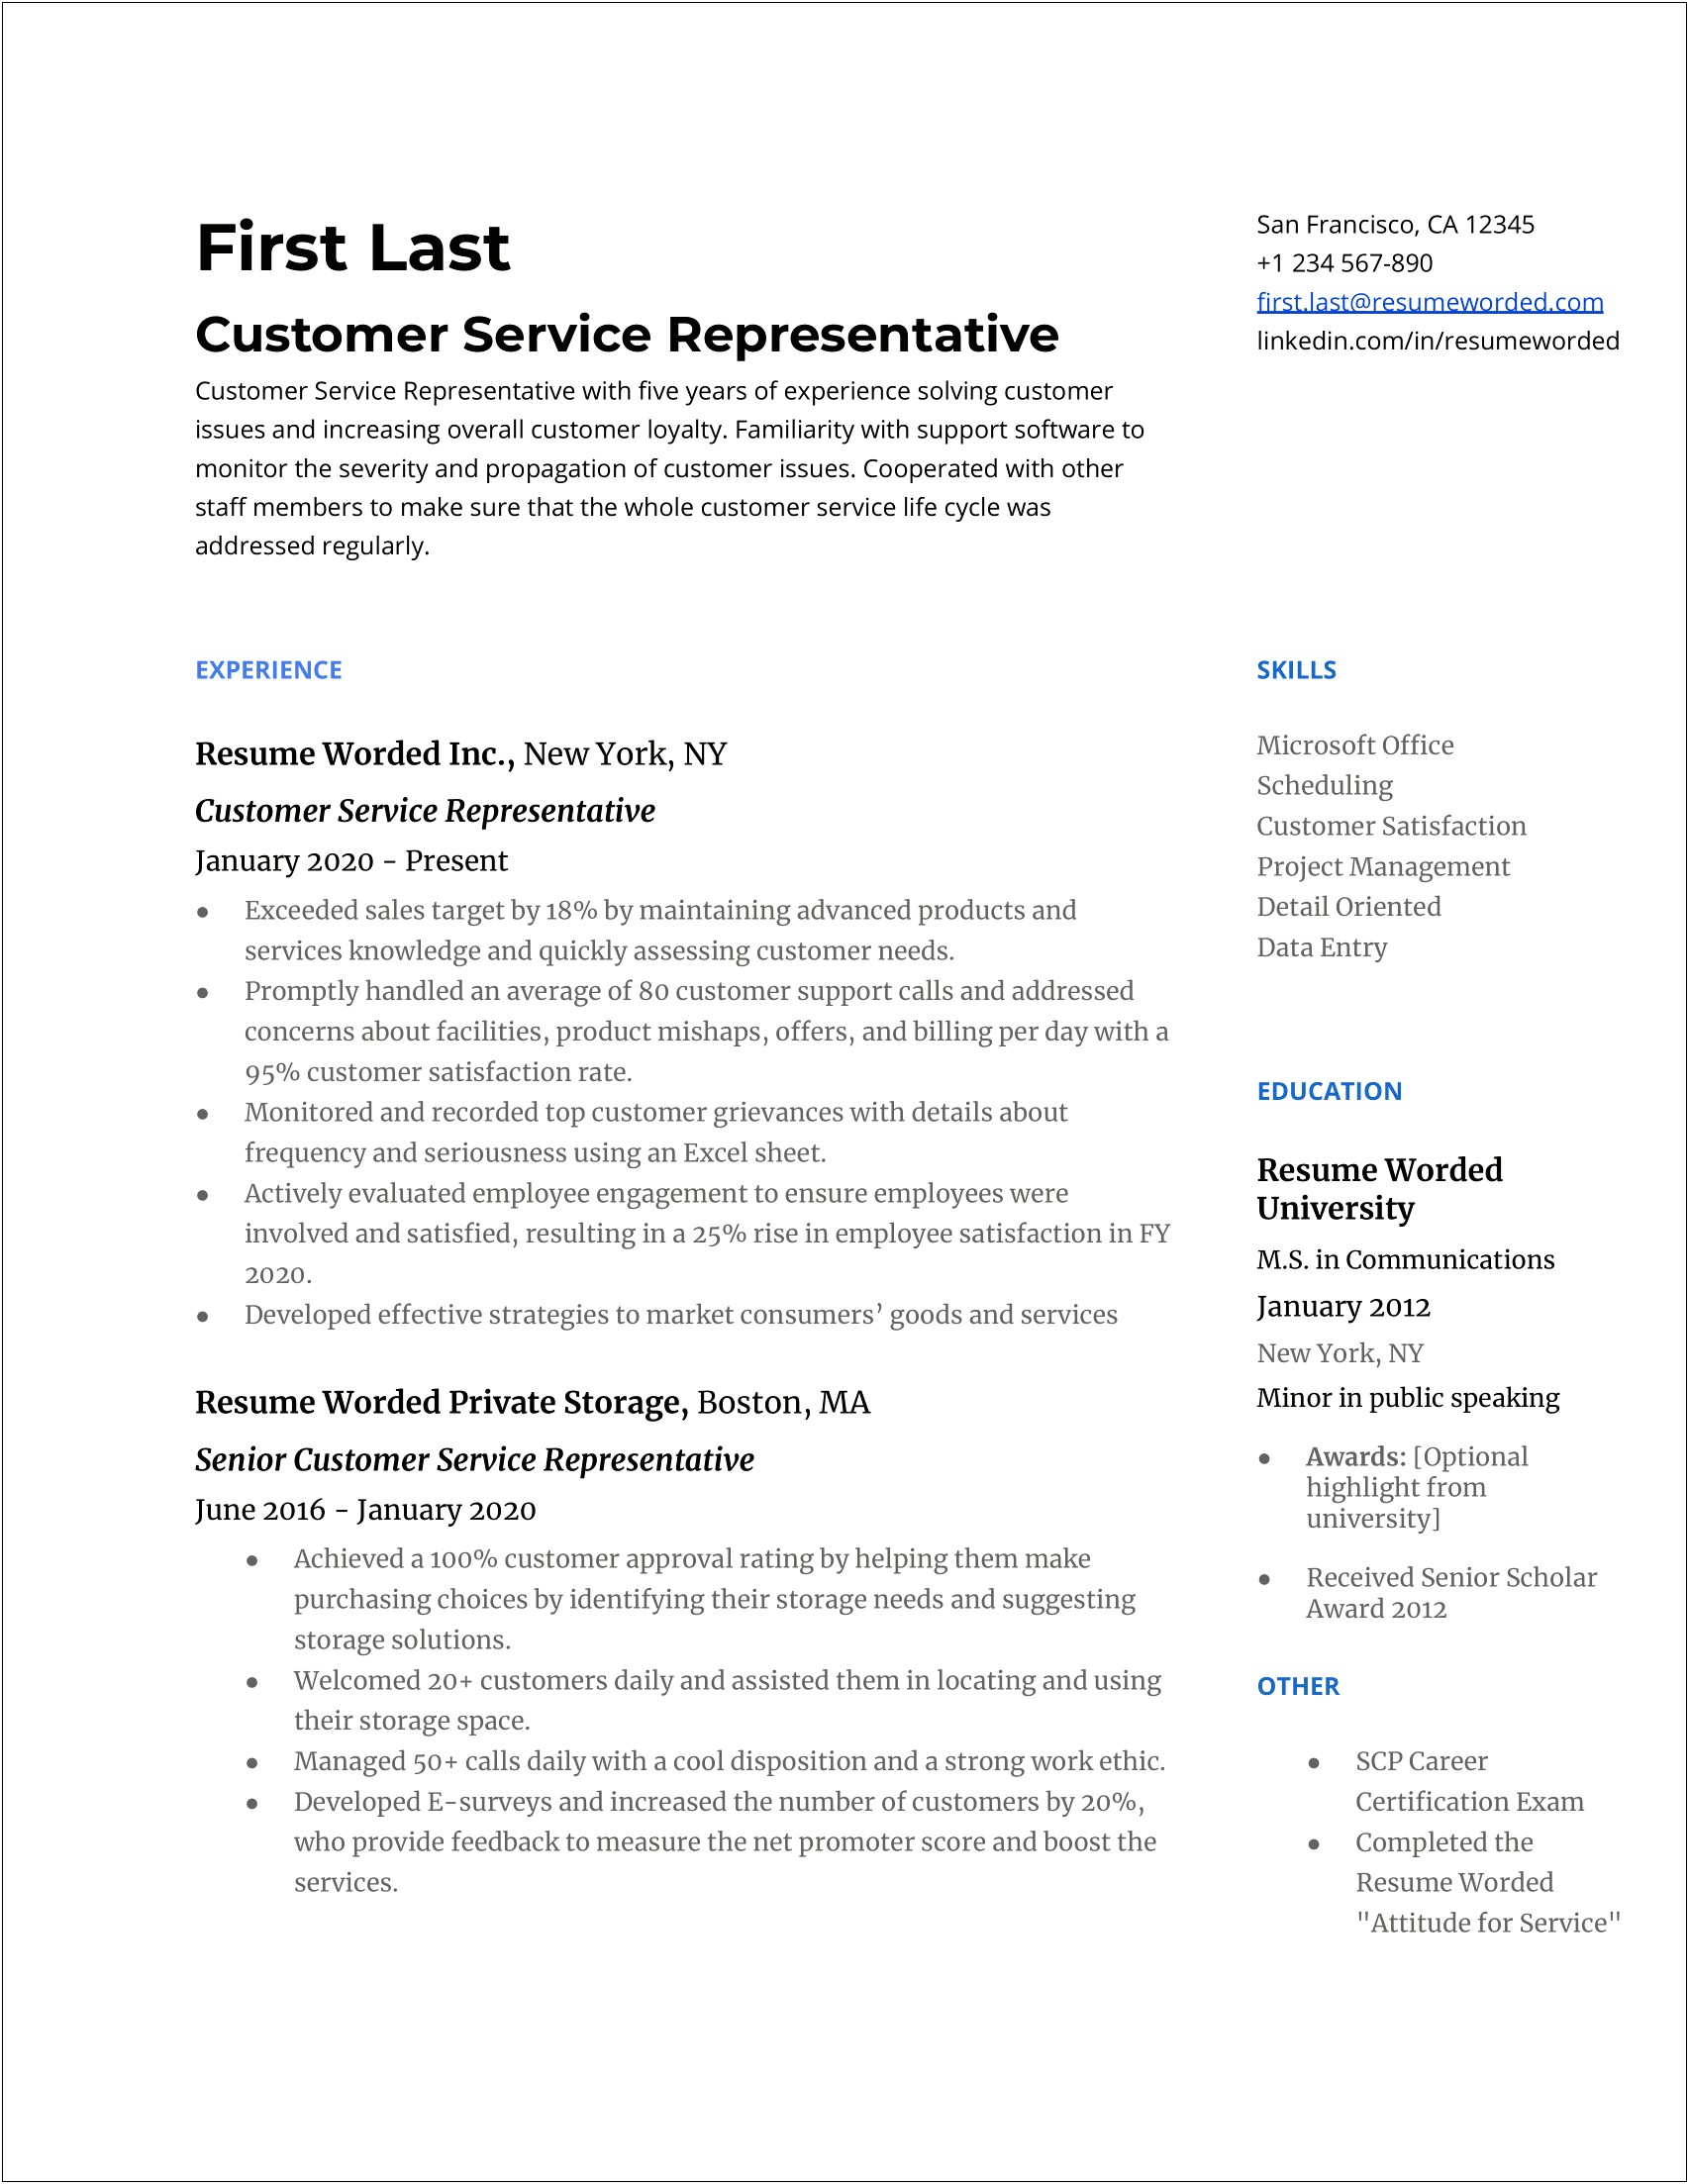 Examples Of Customer Service Supervisor Resume